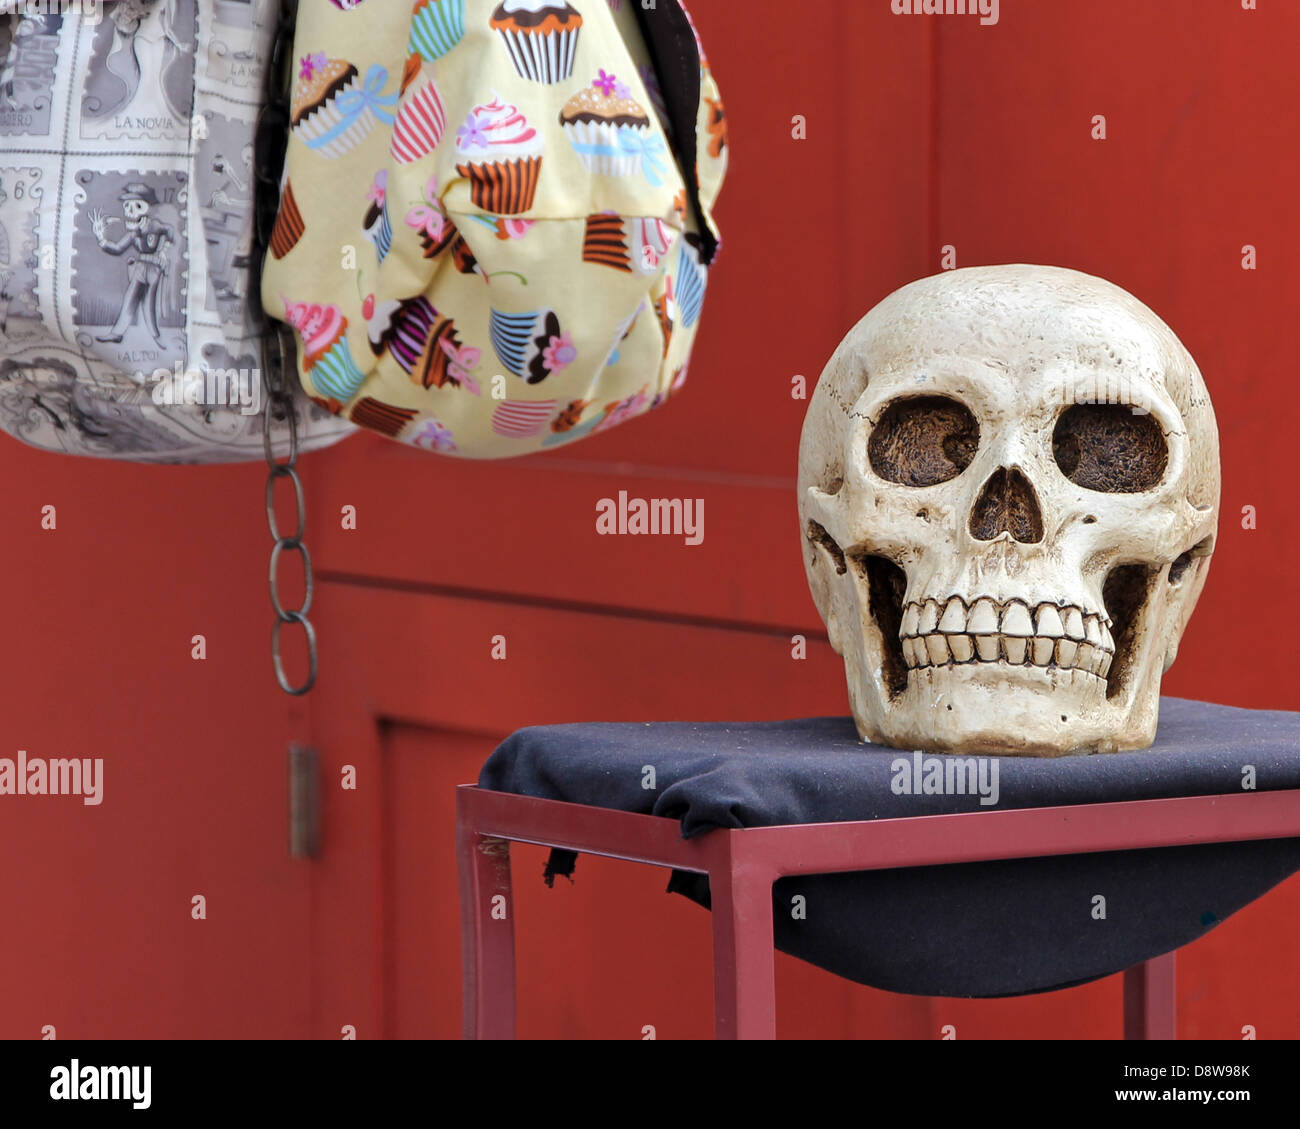 Skull and Bags for sale at a street vendor stall in Los Angeles Plaza Park near Olvera Street, Downtown Los Angeles. Stock Photo